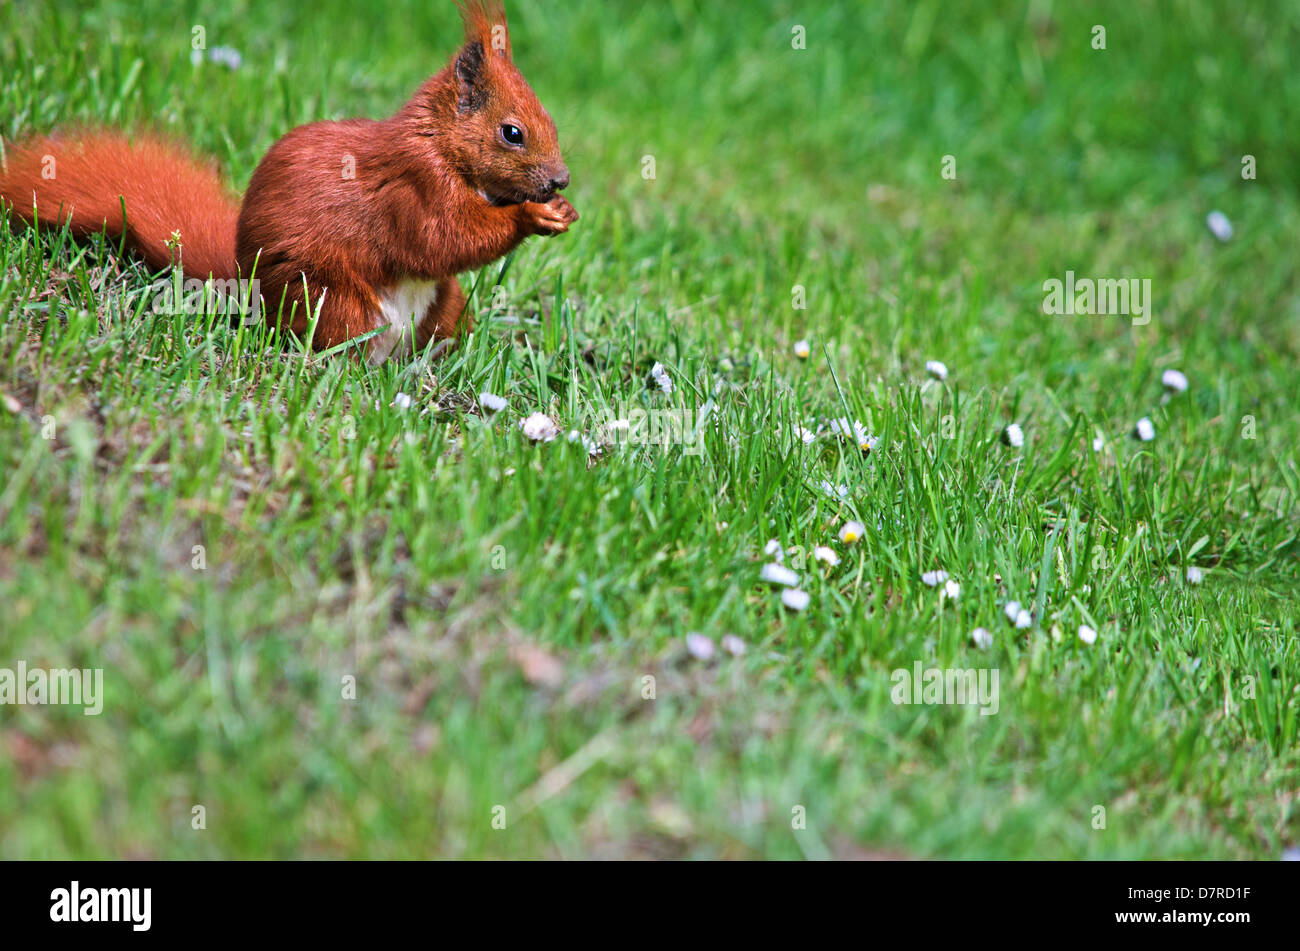 A red squirrel sitting on a green meadow with daisies. Shallow depth of field. Much free copy space. Stock Photo